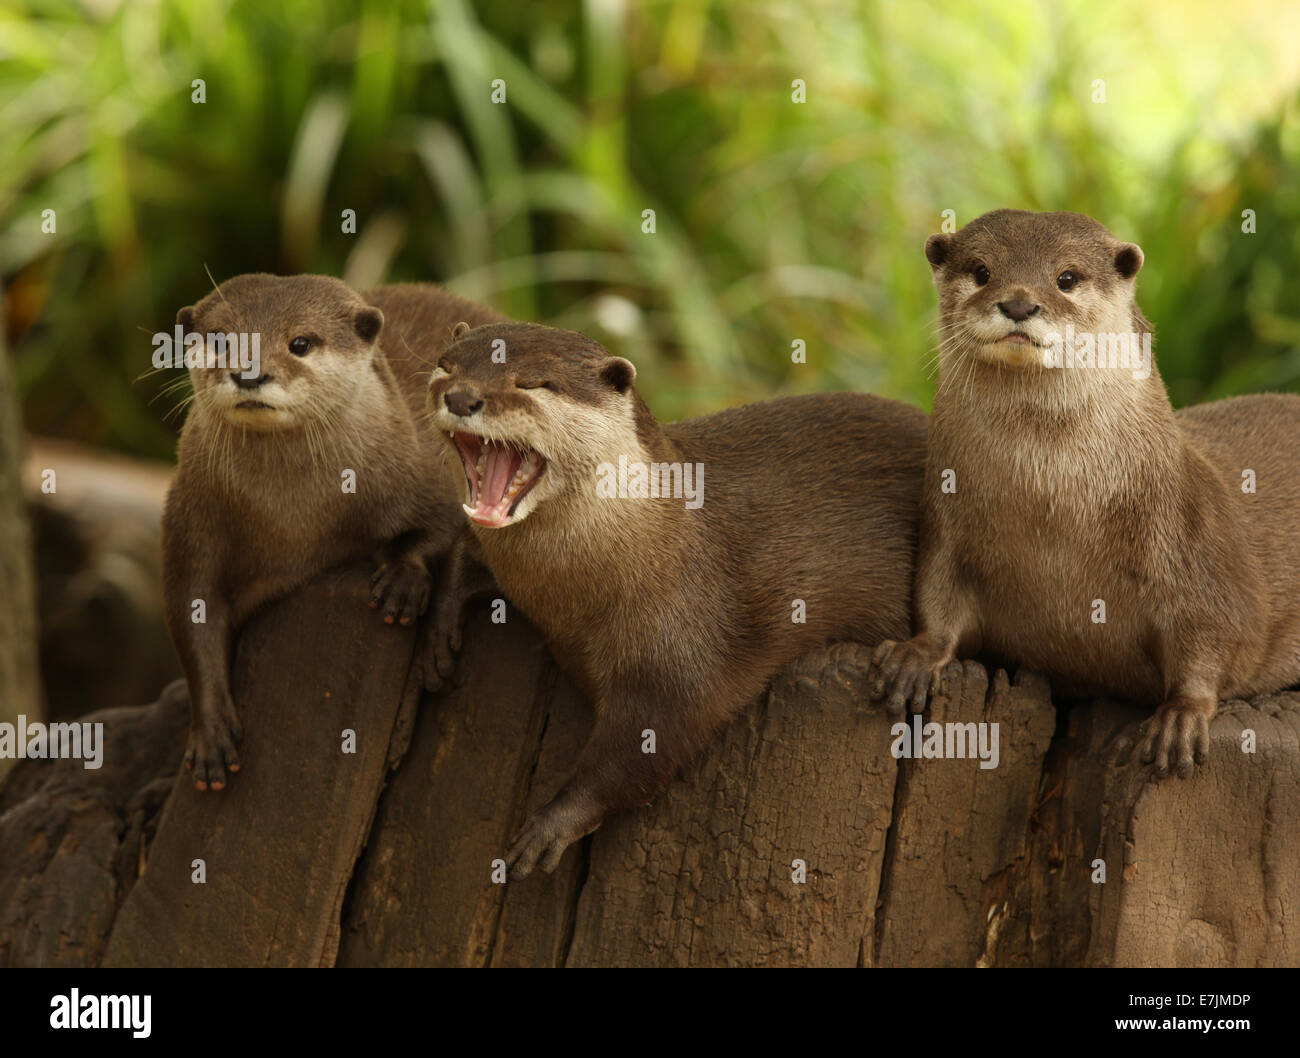 A group of European Otters Stock Photo